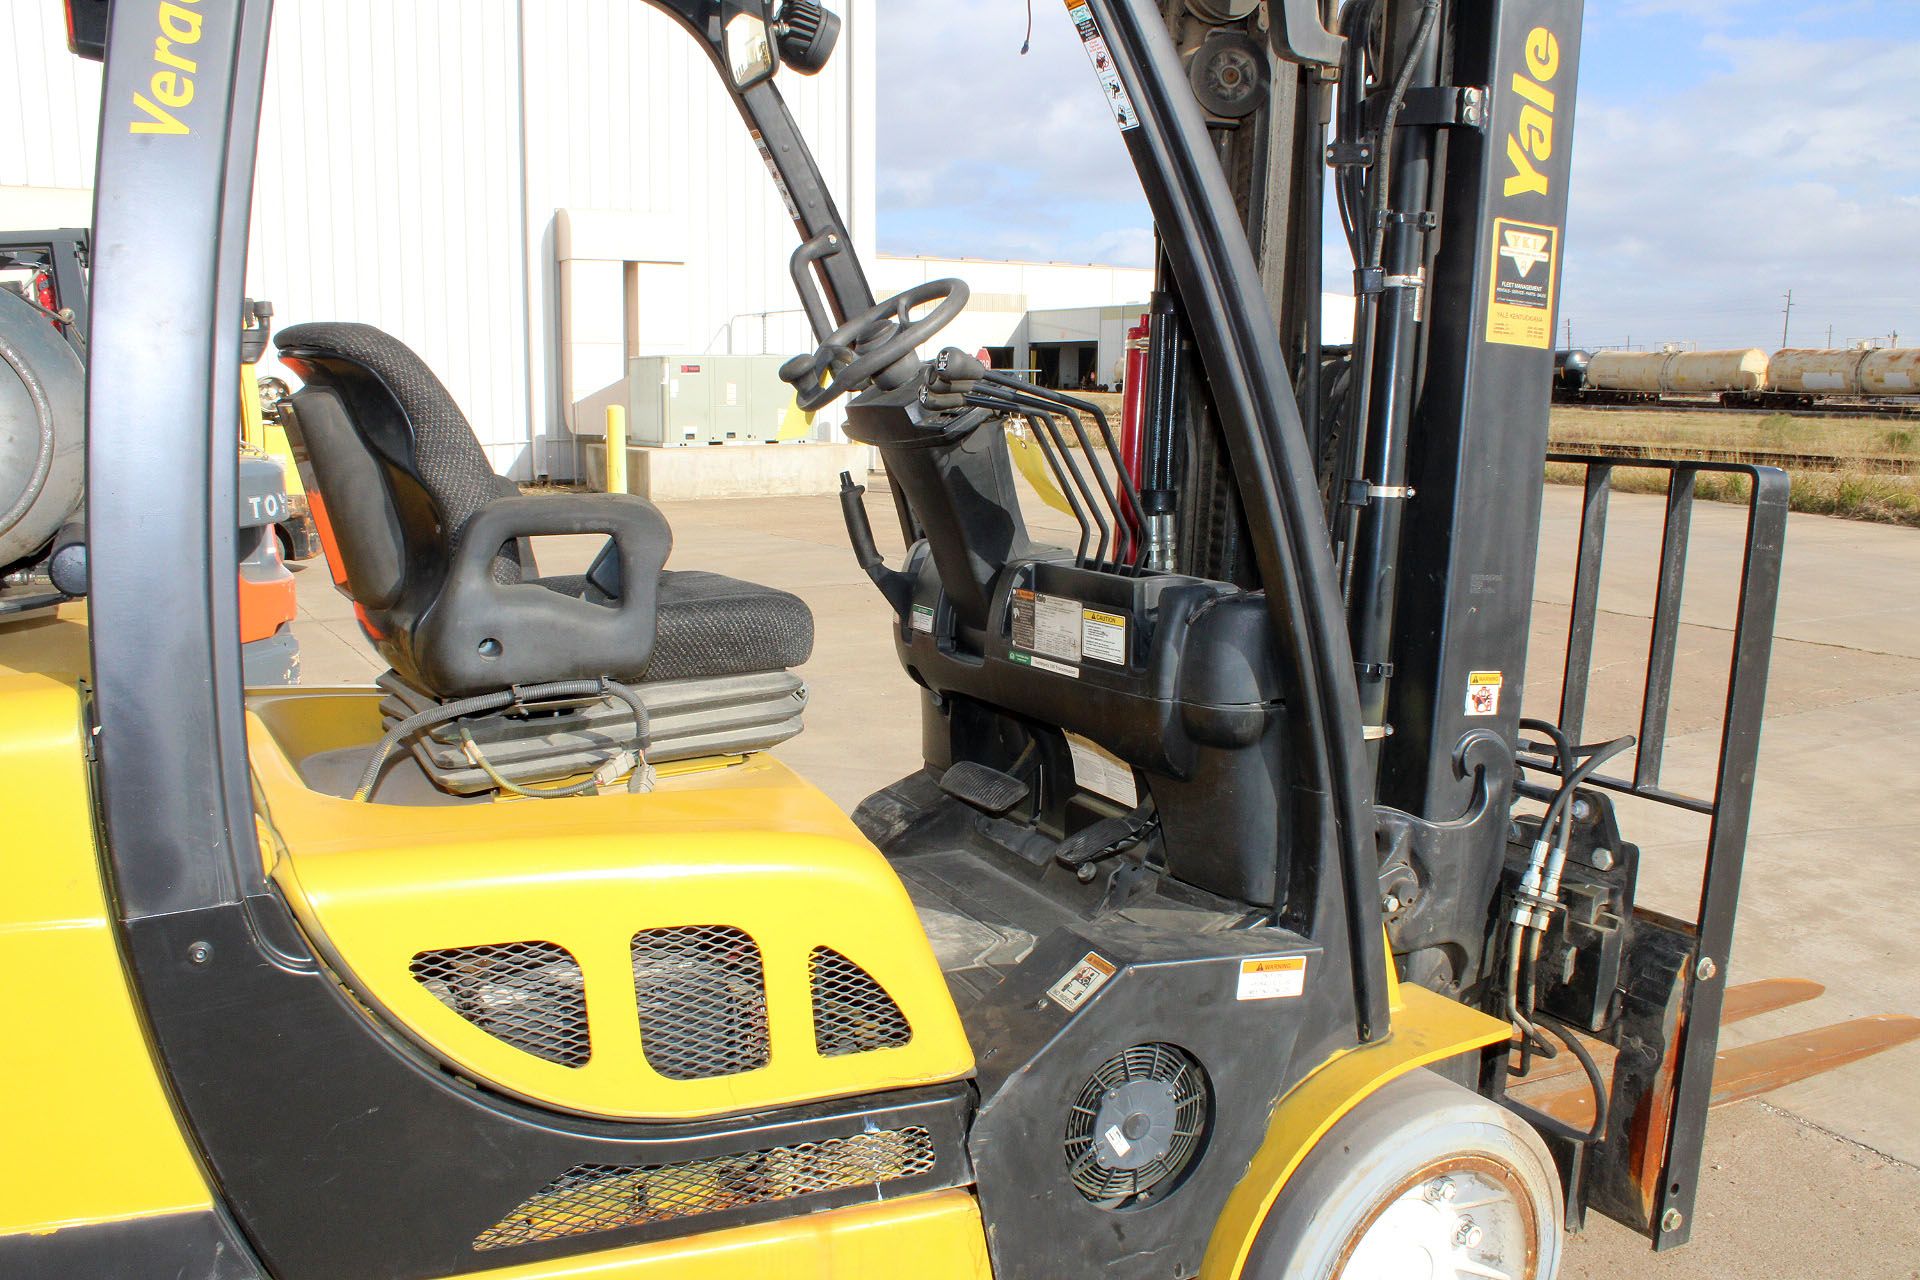 FORKLIFT, YALE 8,000 LB. BASE CAP. MDL. GLC080, new 2016, LPG, 200" max. lift ht., 94" 3-stage mast, - Image 5 of 11